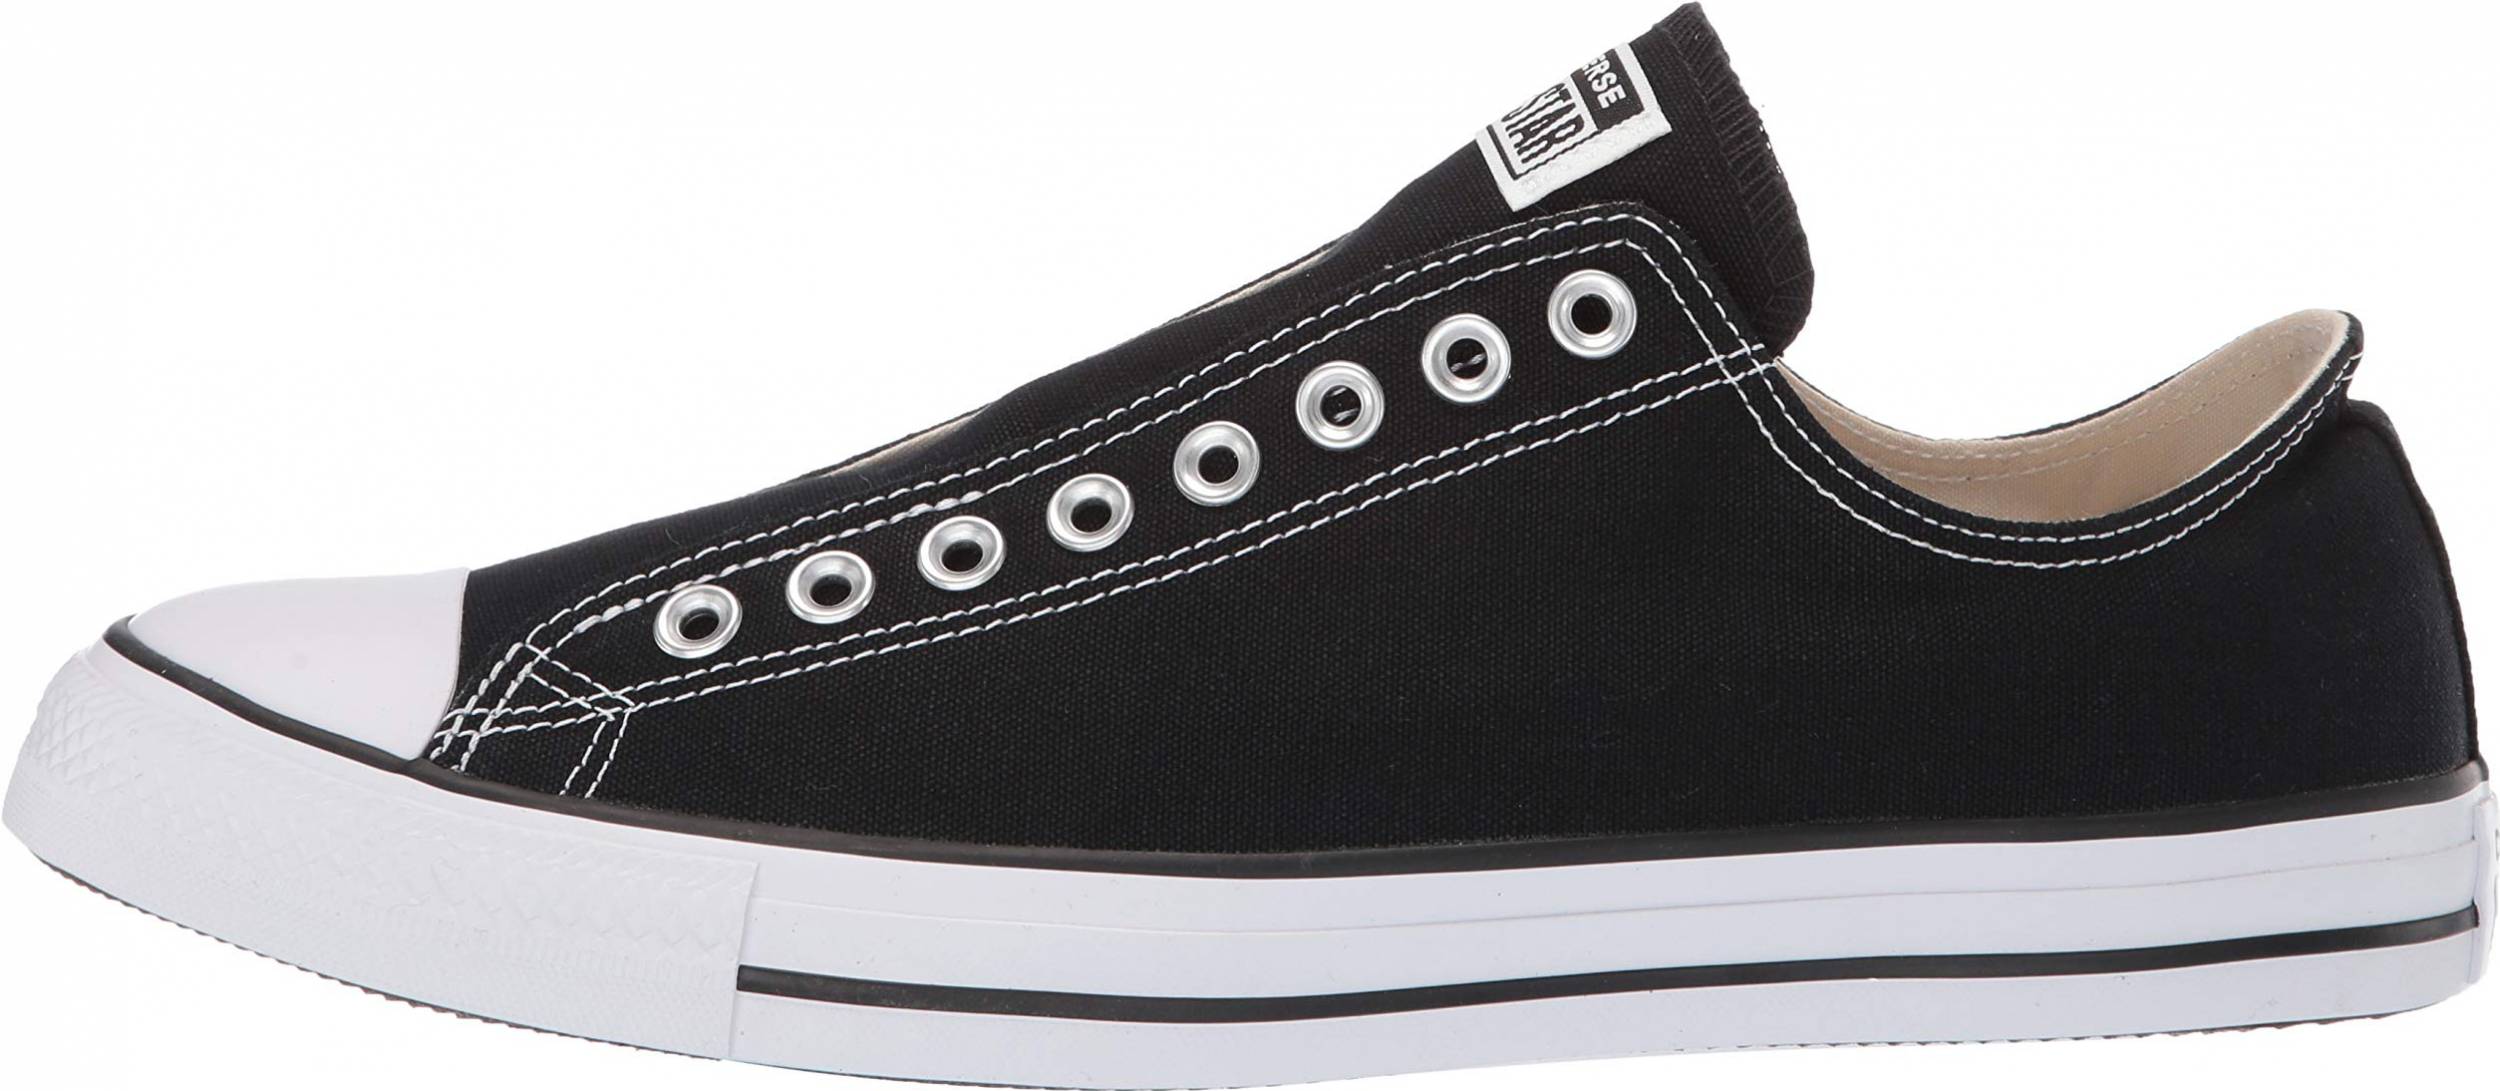 Save 27% on Converse Cheap Sneakers (34 